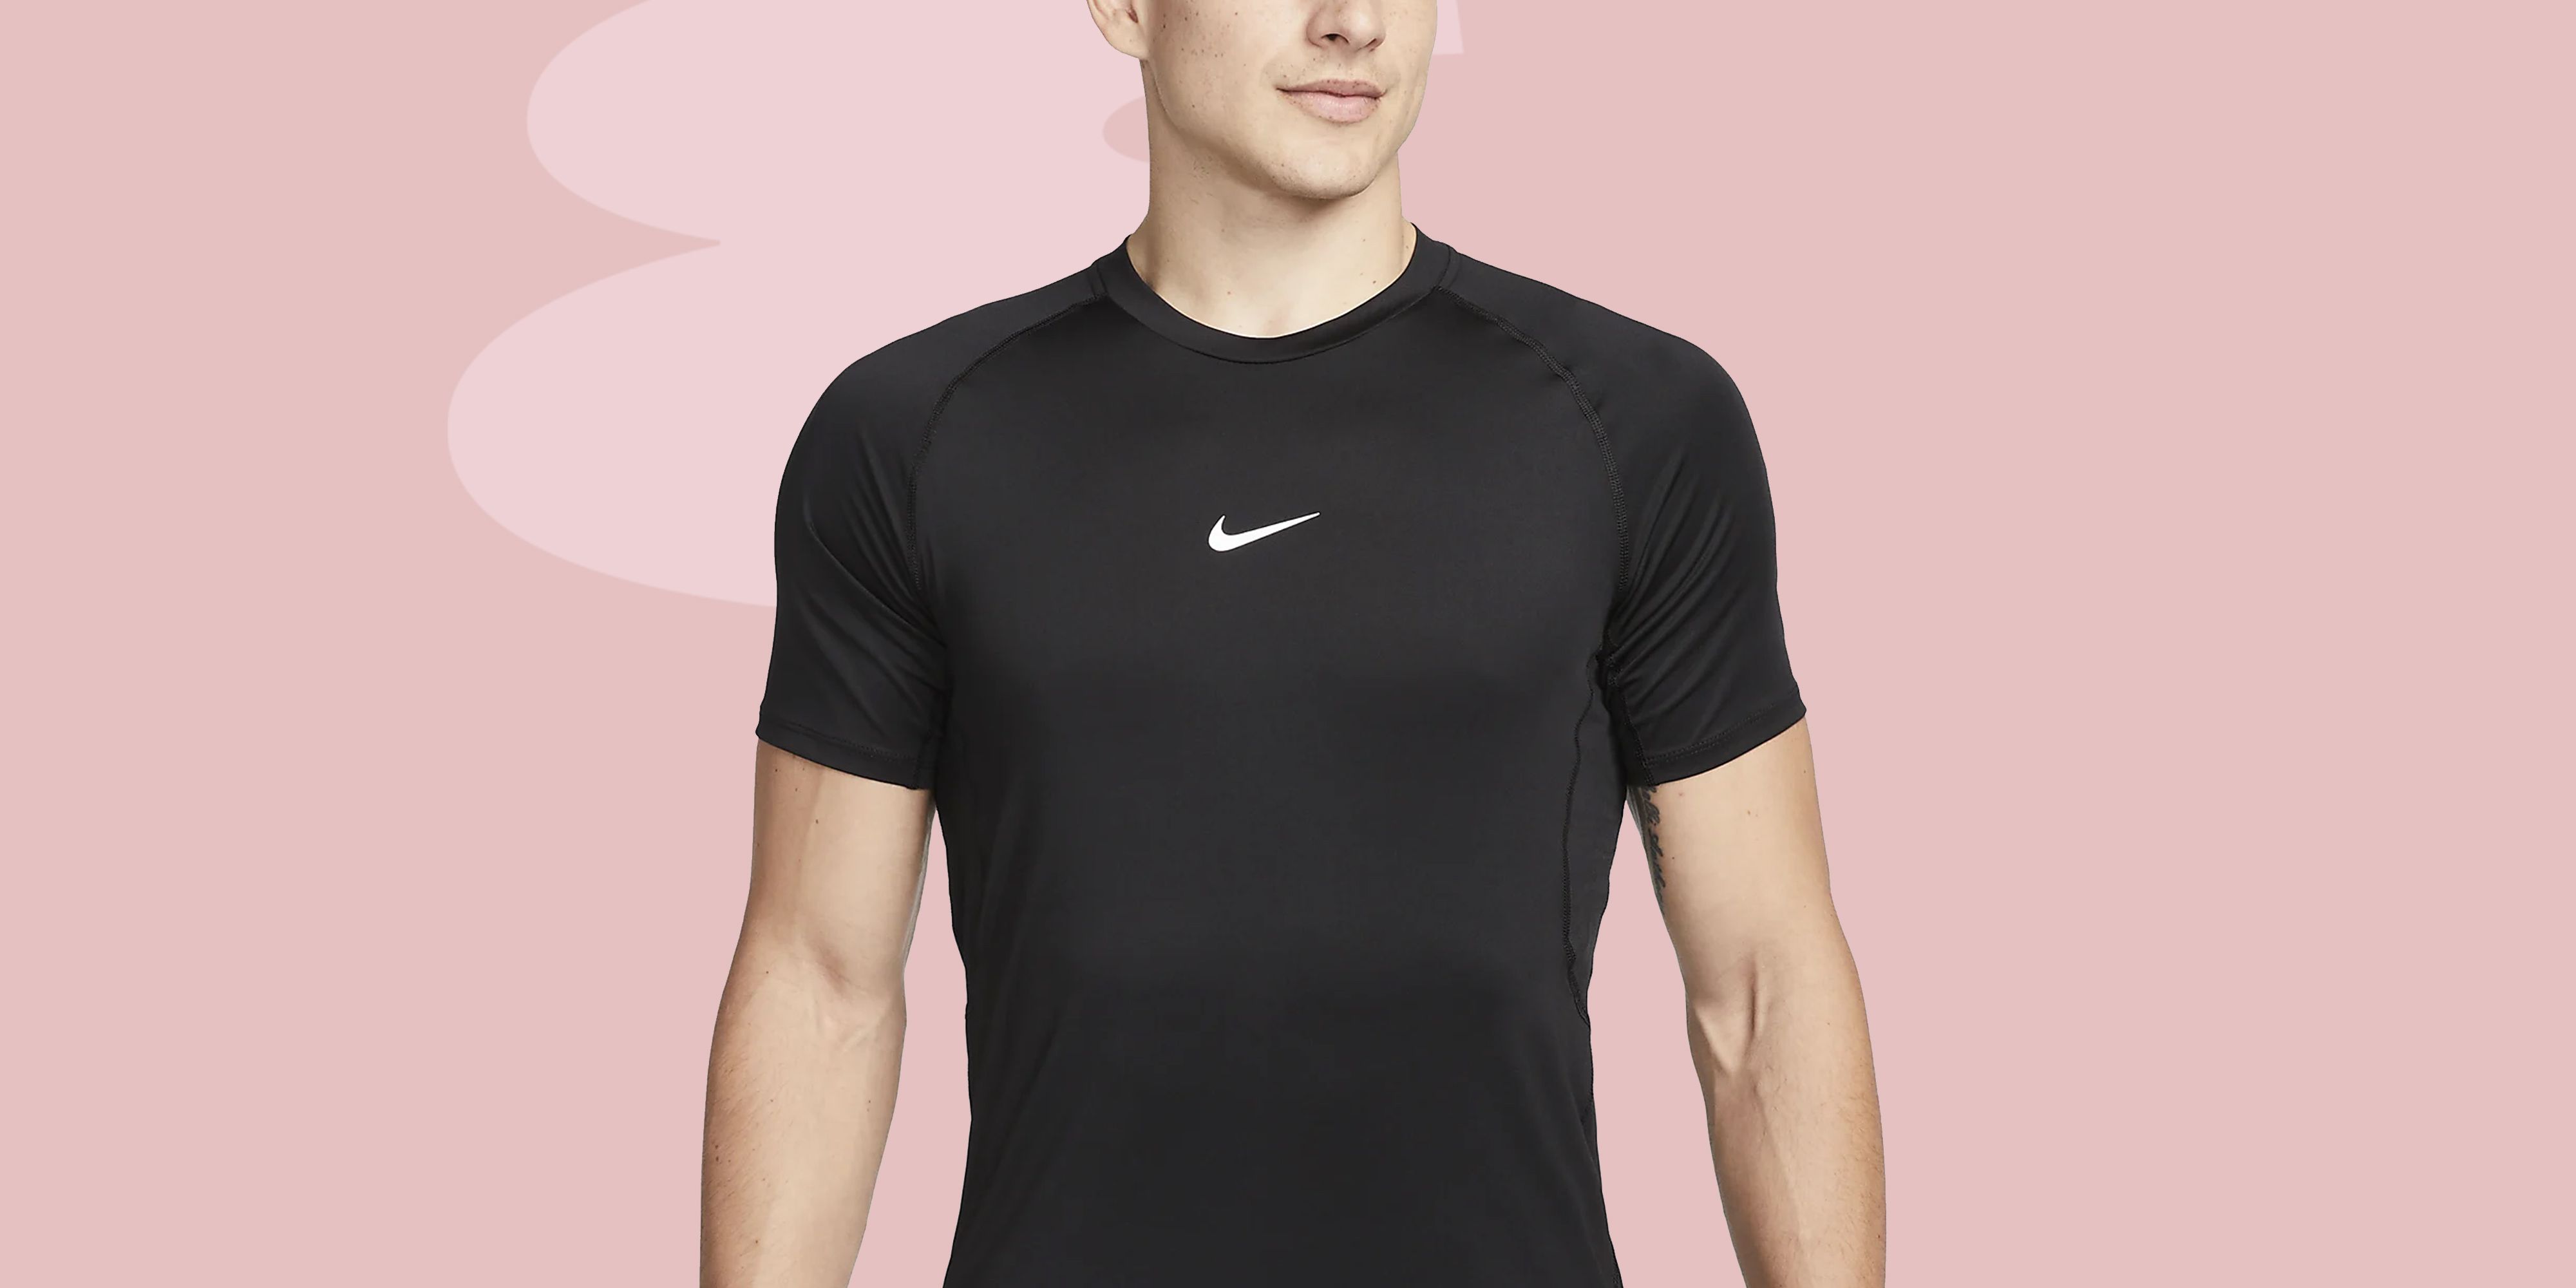 Every Runner Must Have Under Armour Compression Shirts for Better